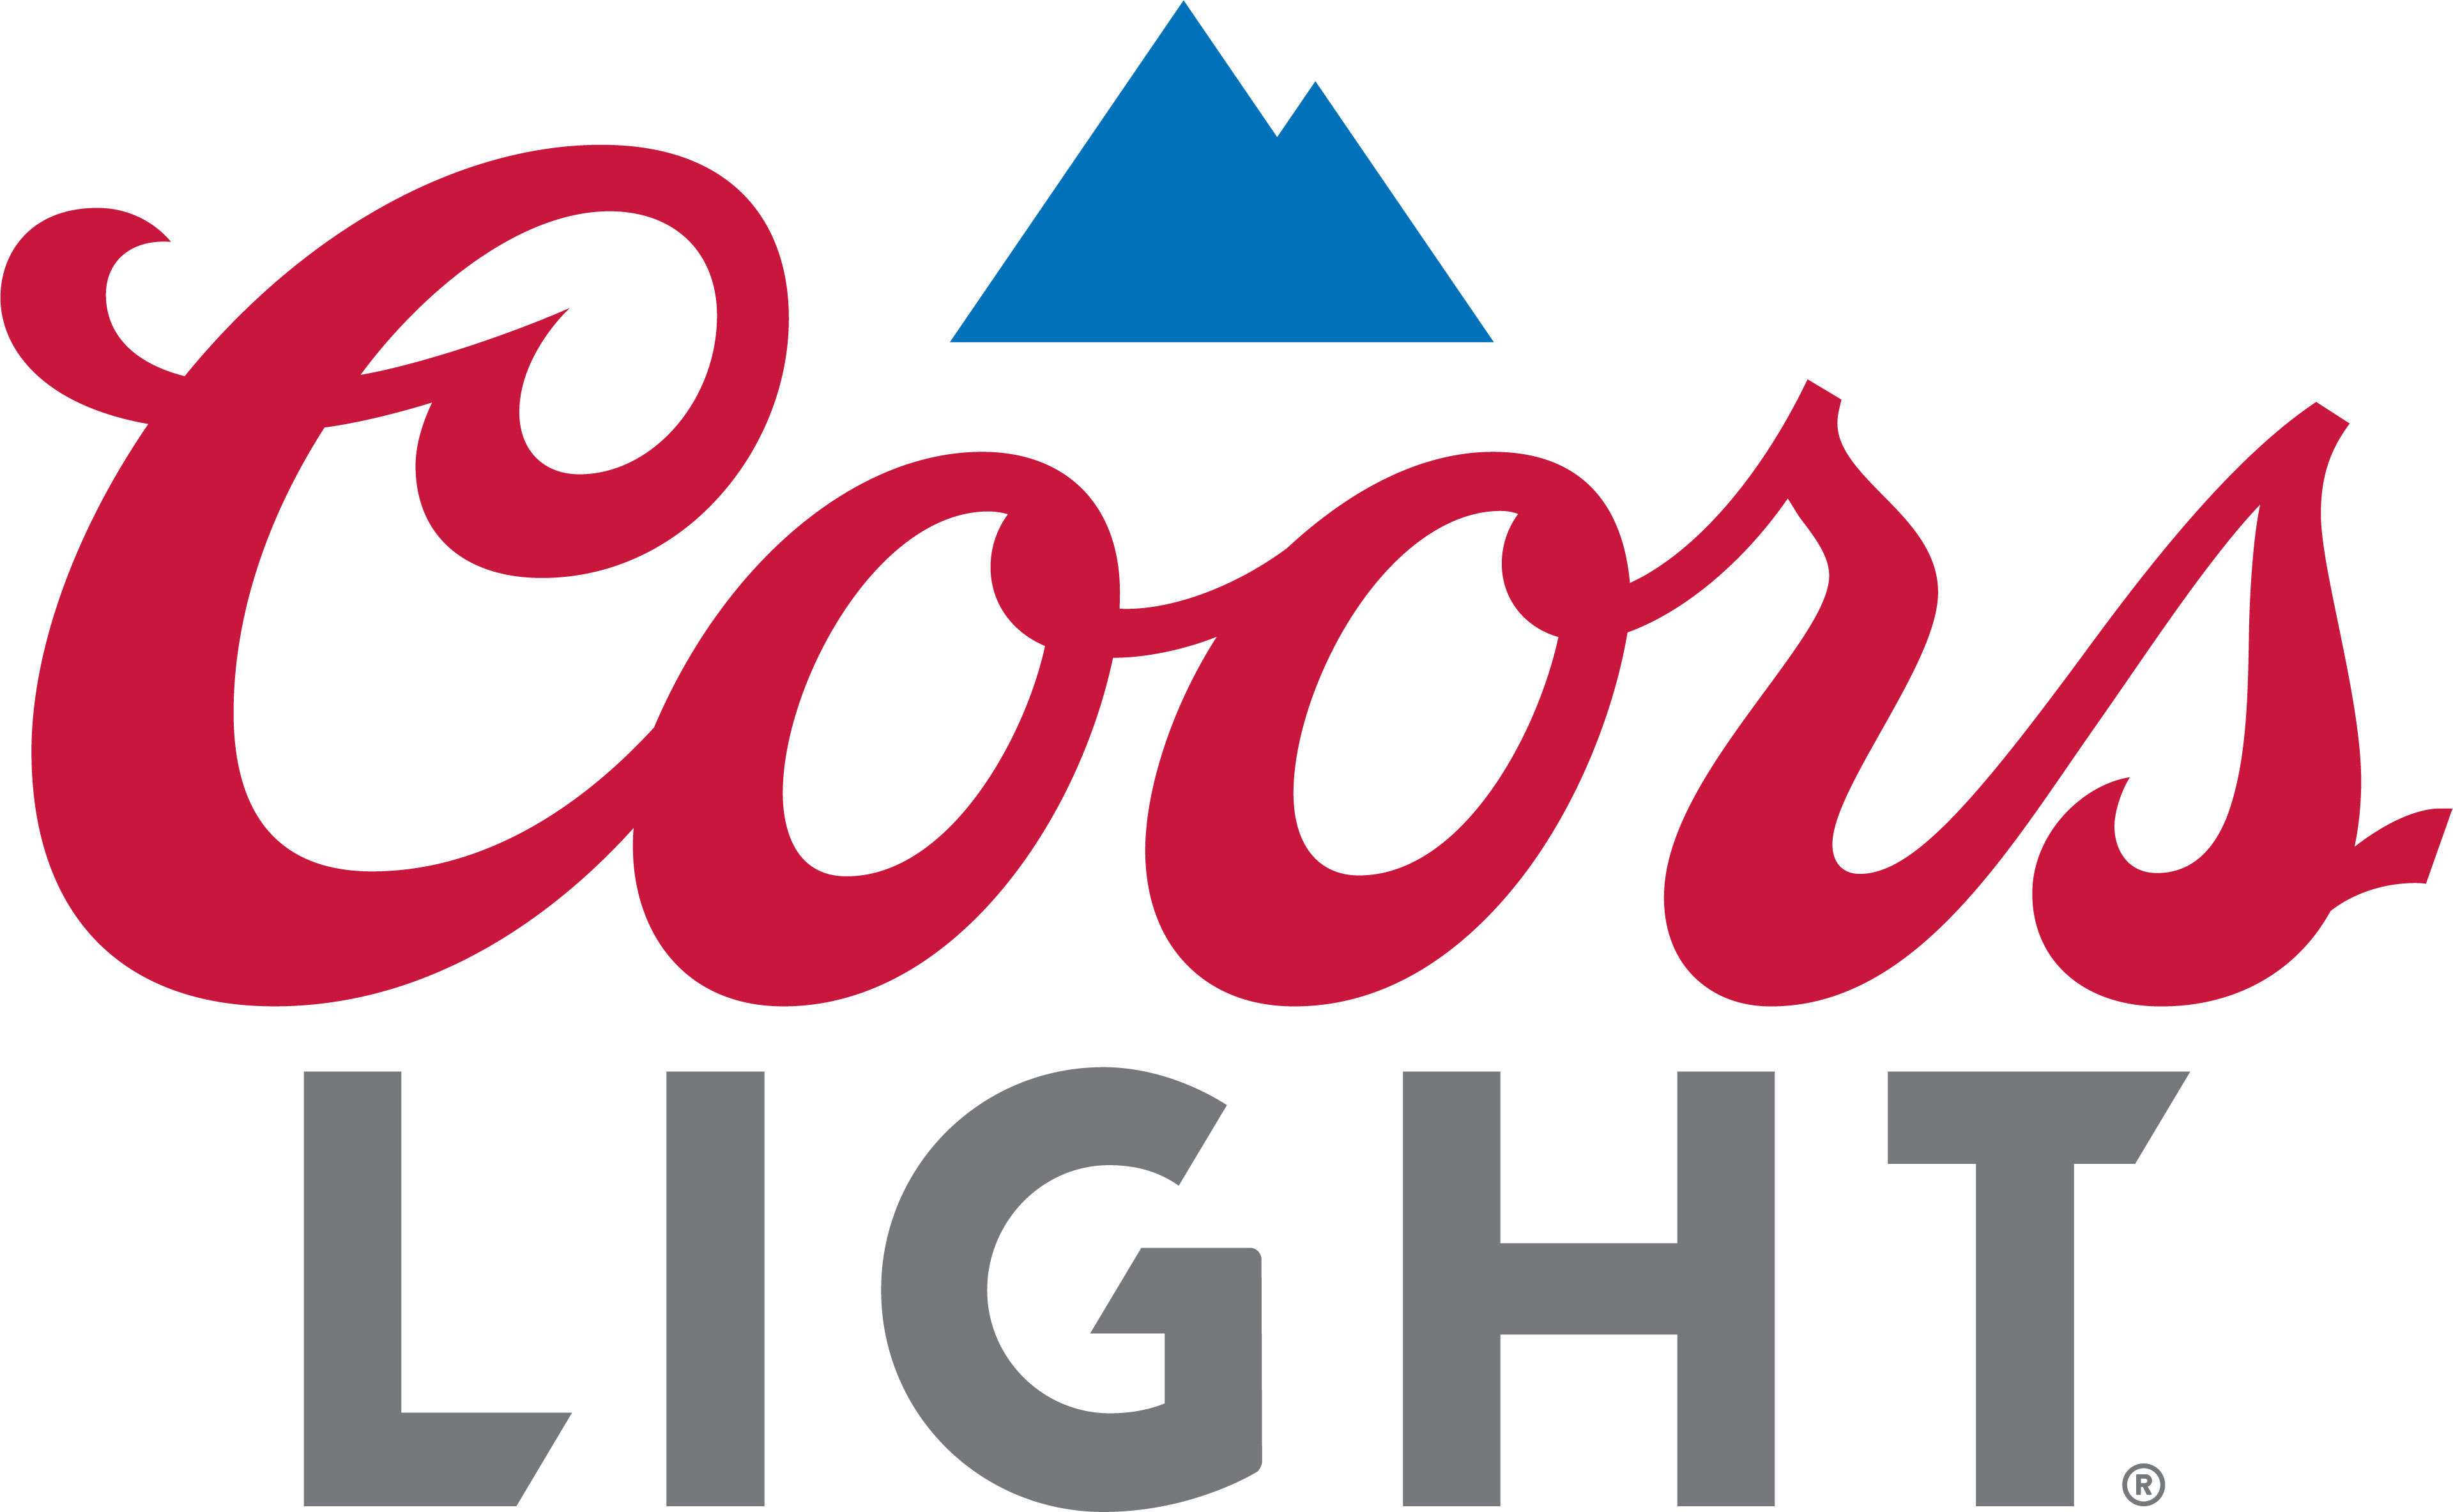 Coors Light Brewed Beer Using Ice Scraped from Stanley Cup Winner's Arena